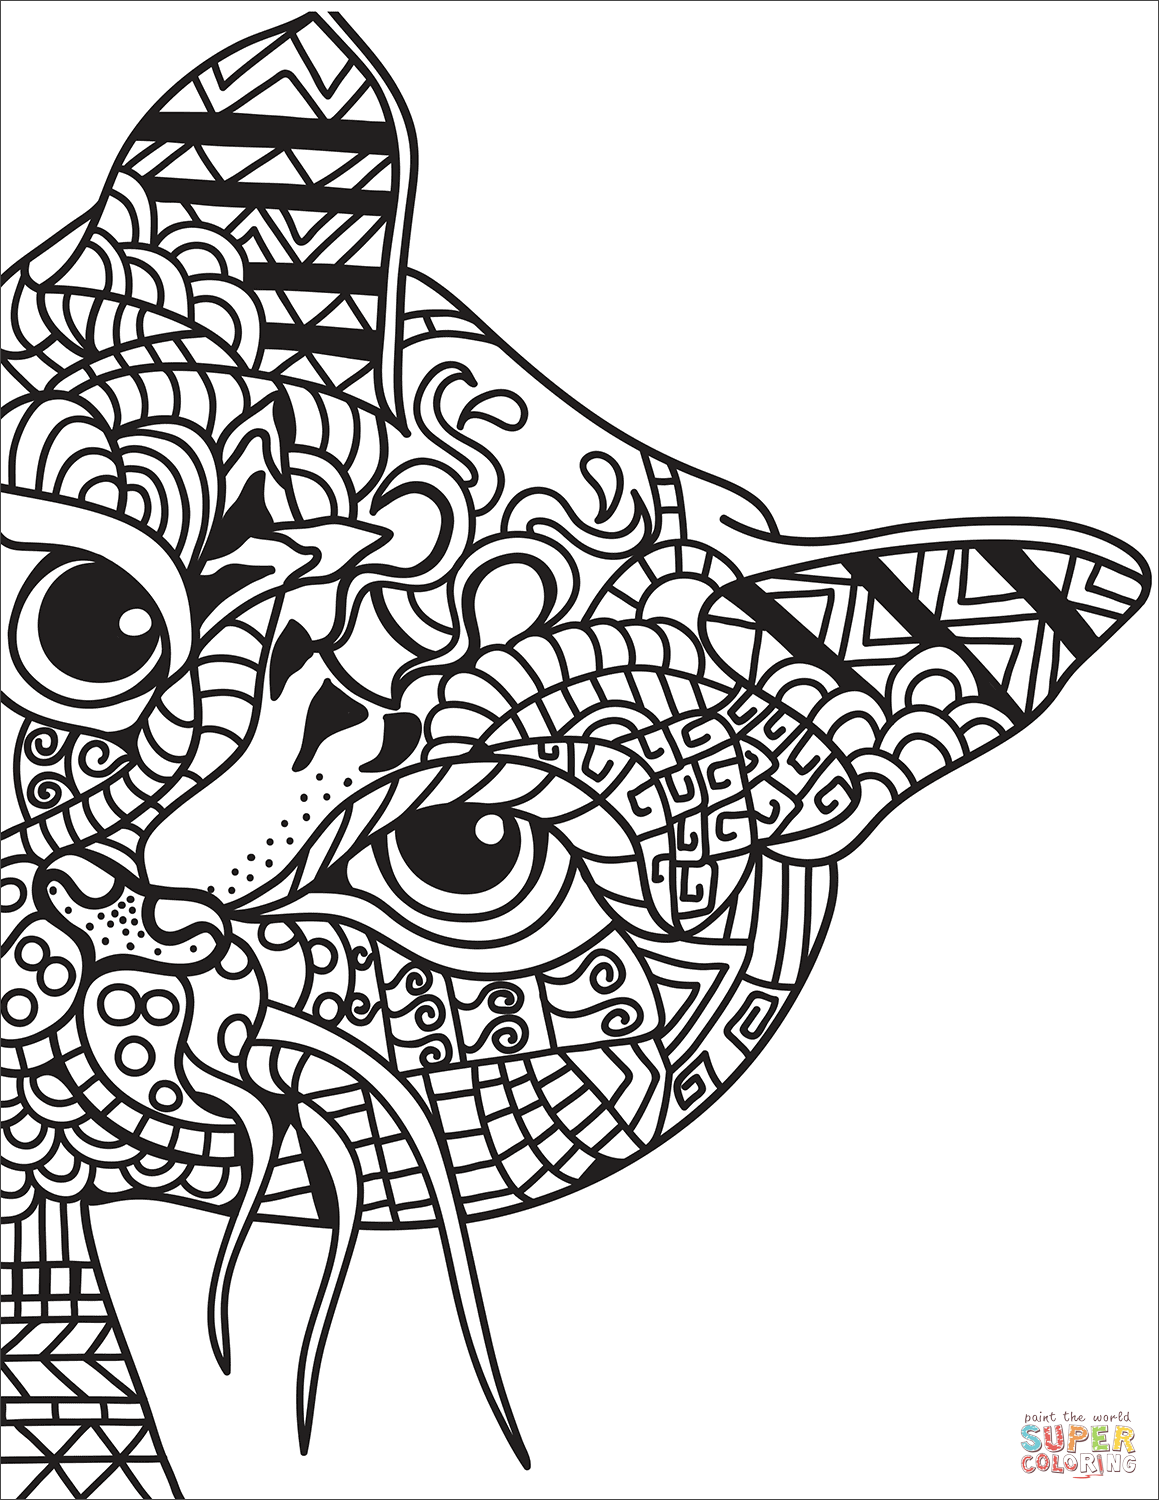 https://healthcarechannel.co/wp-content/uploads/2020/04/zentangle-cat-7-coloring-page.png